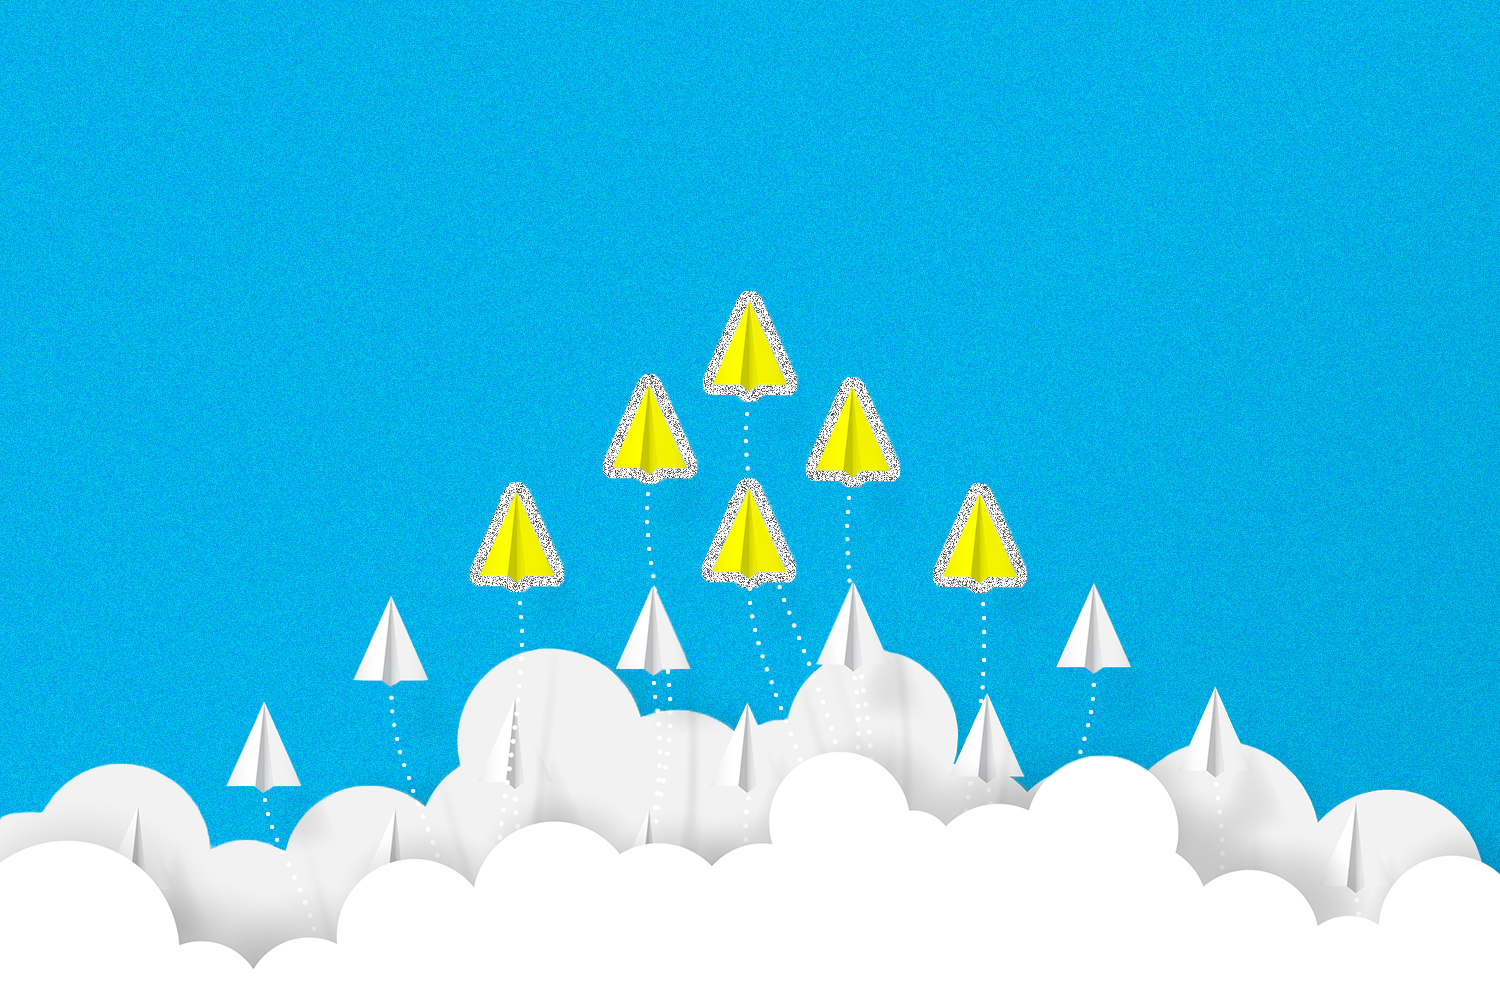 Yellow and white paper airplanes flying in an upward position above white clouds into a blue sky